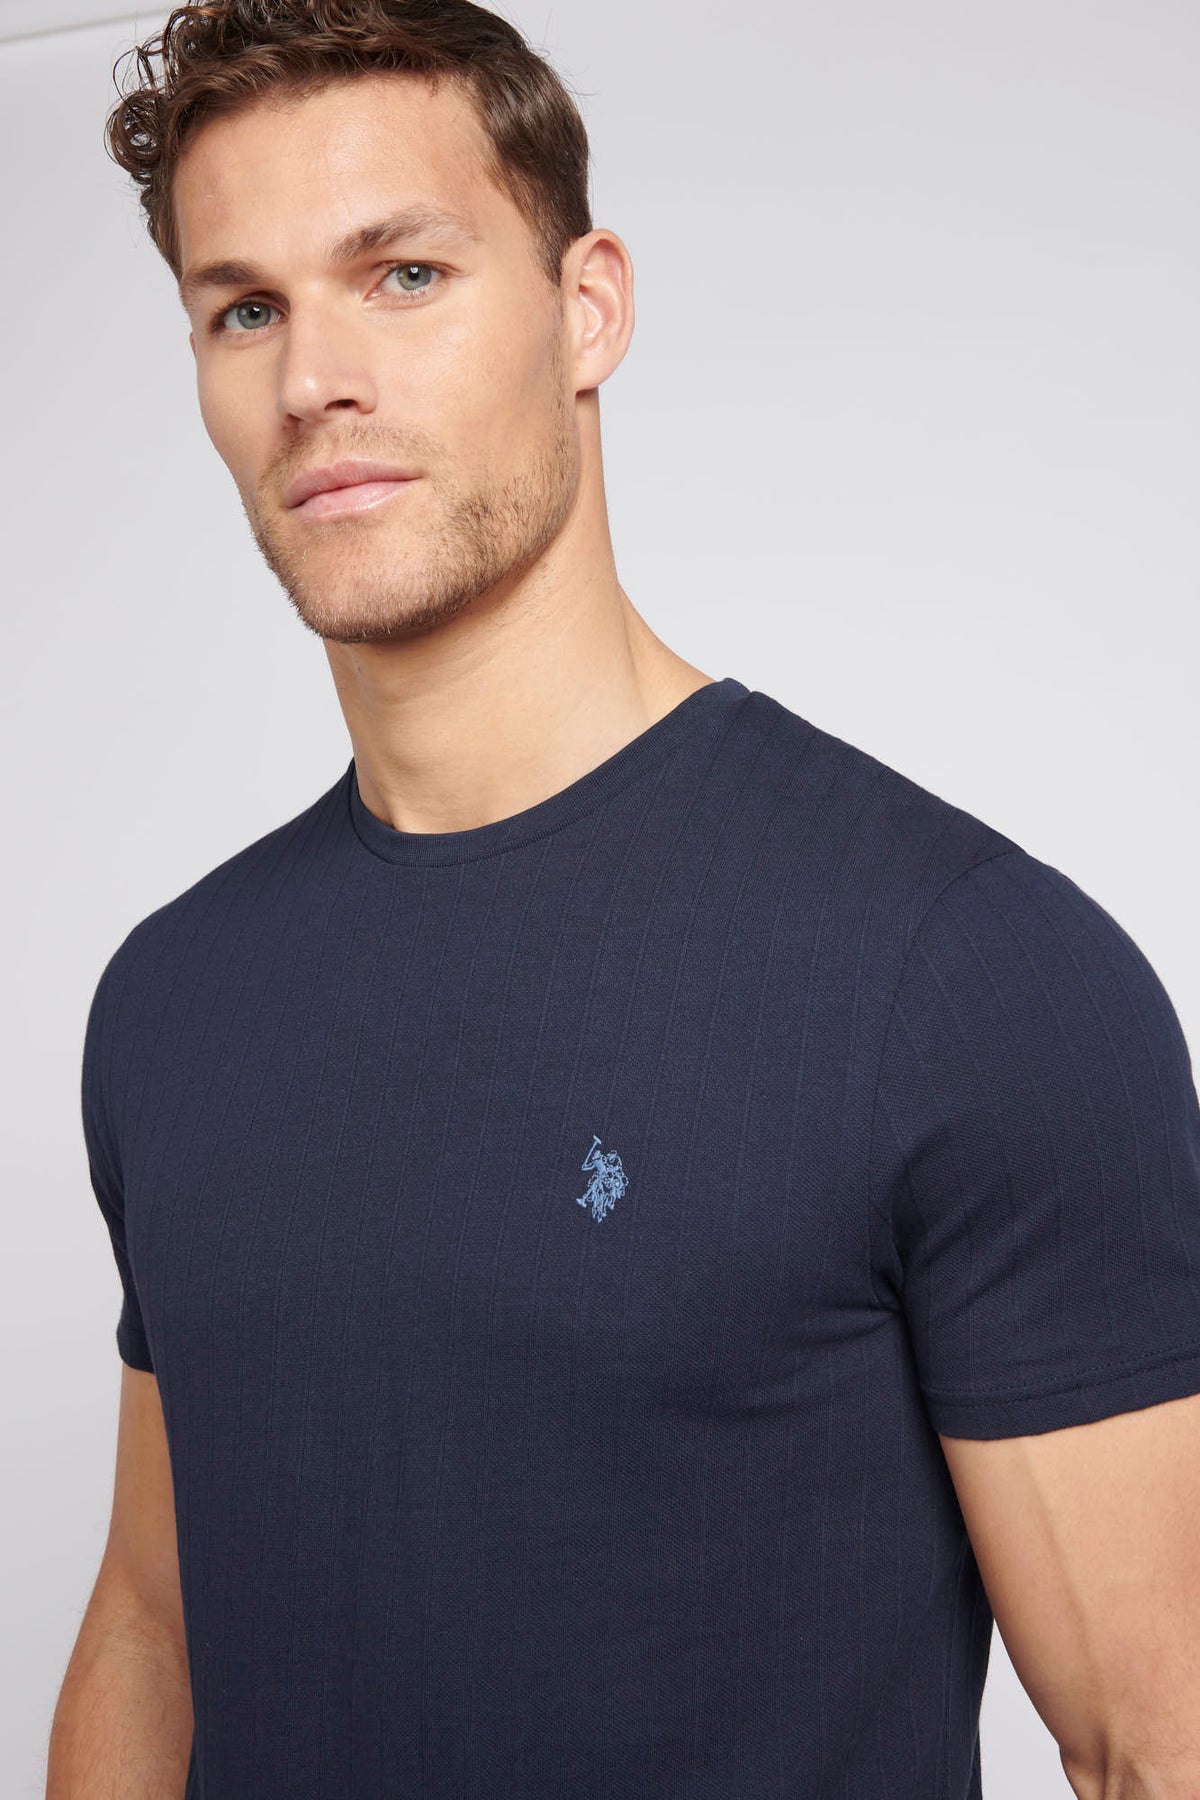 Mens Classic Fit Verticle Texture T-Shirt in Dark Sapphire Navy